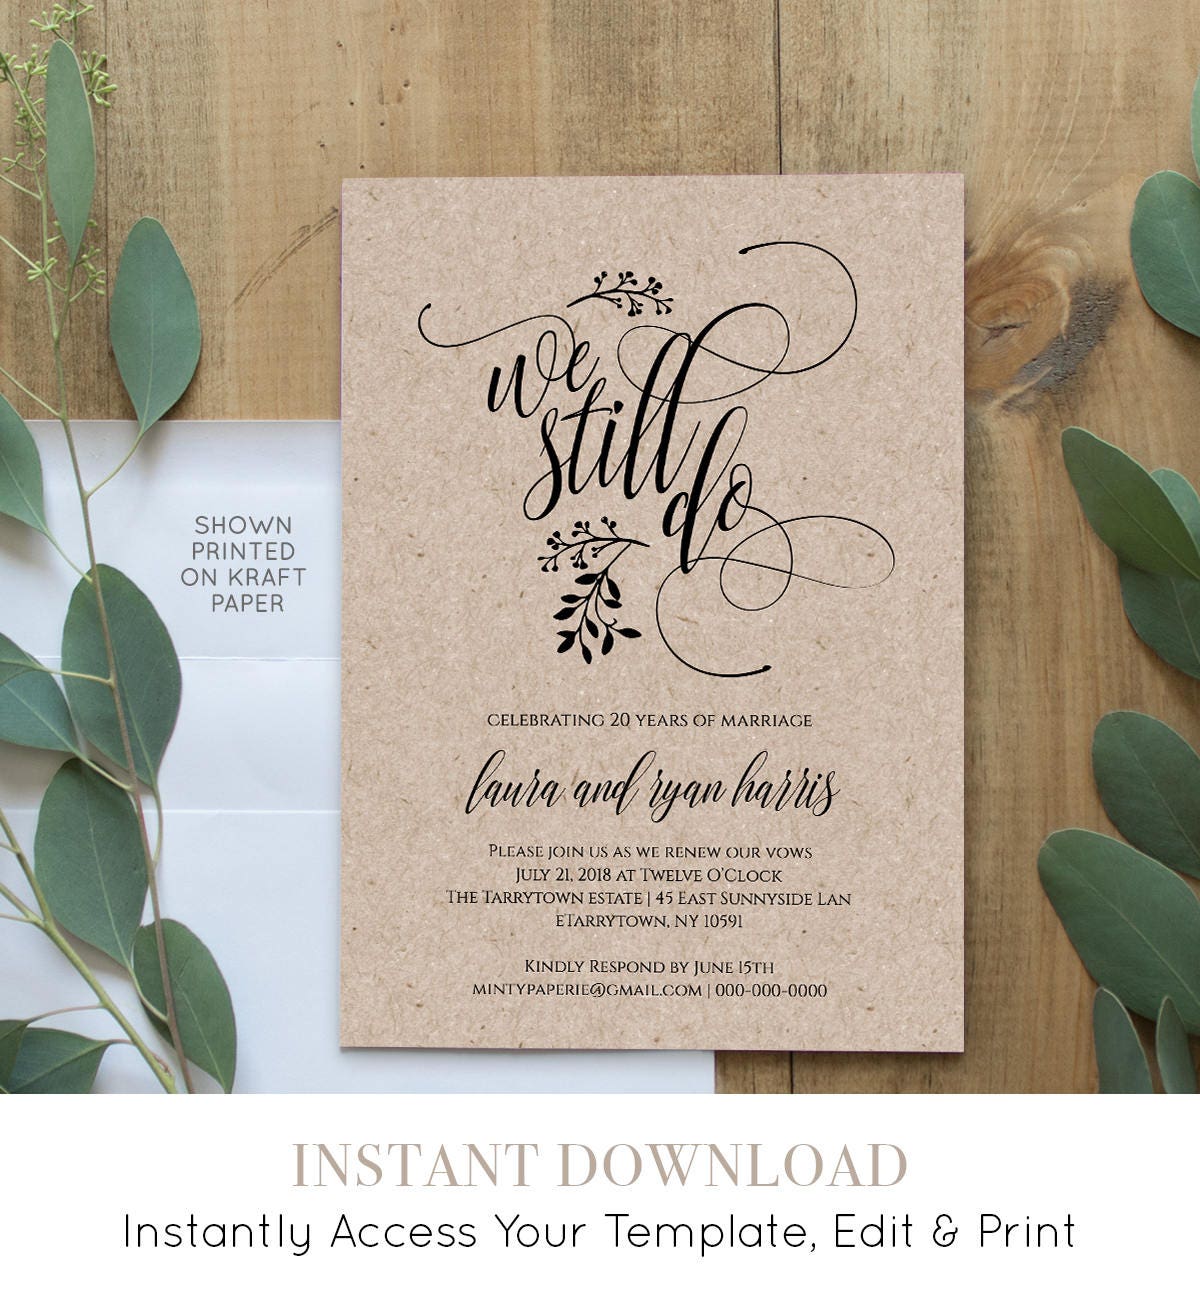 Vow Renewal Invitation Template, Printable, We Still Do, Instant Download, Wedding Anniversary